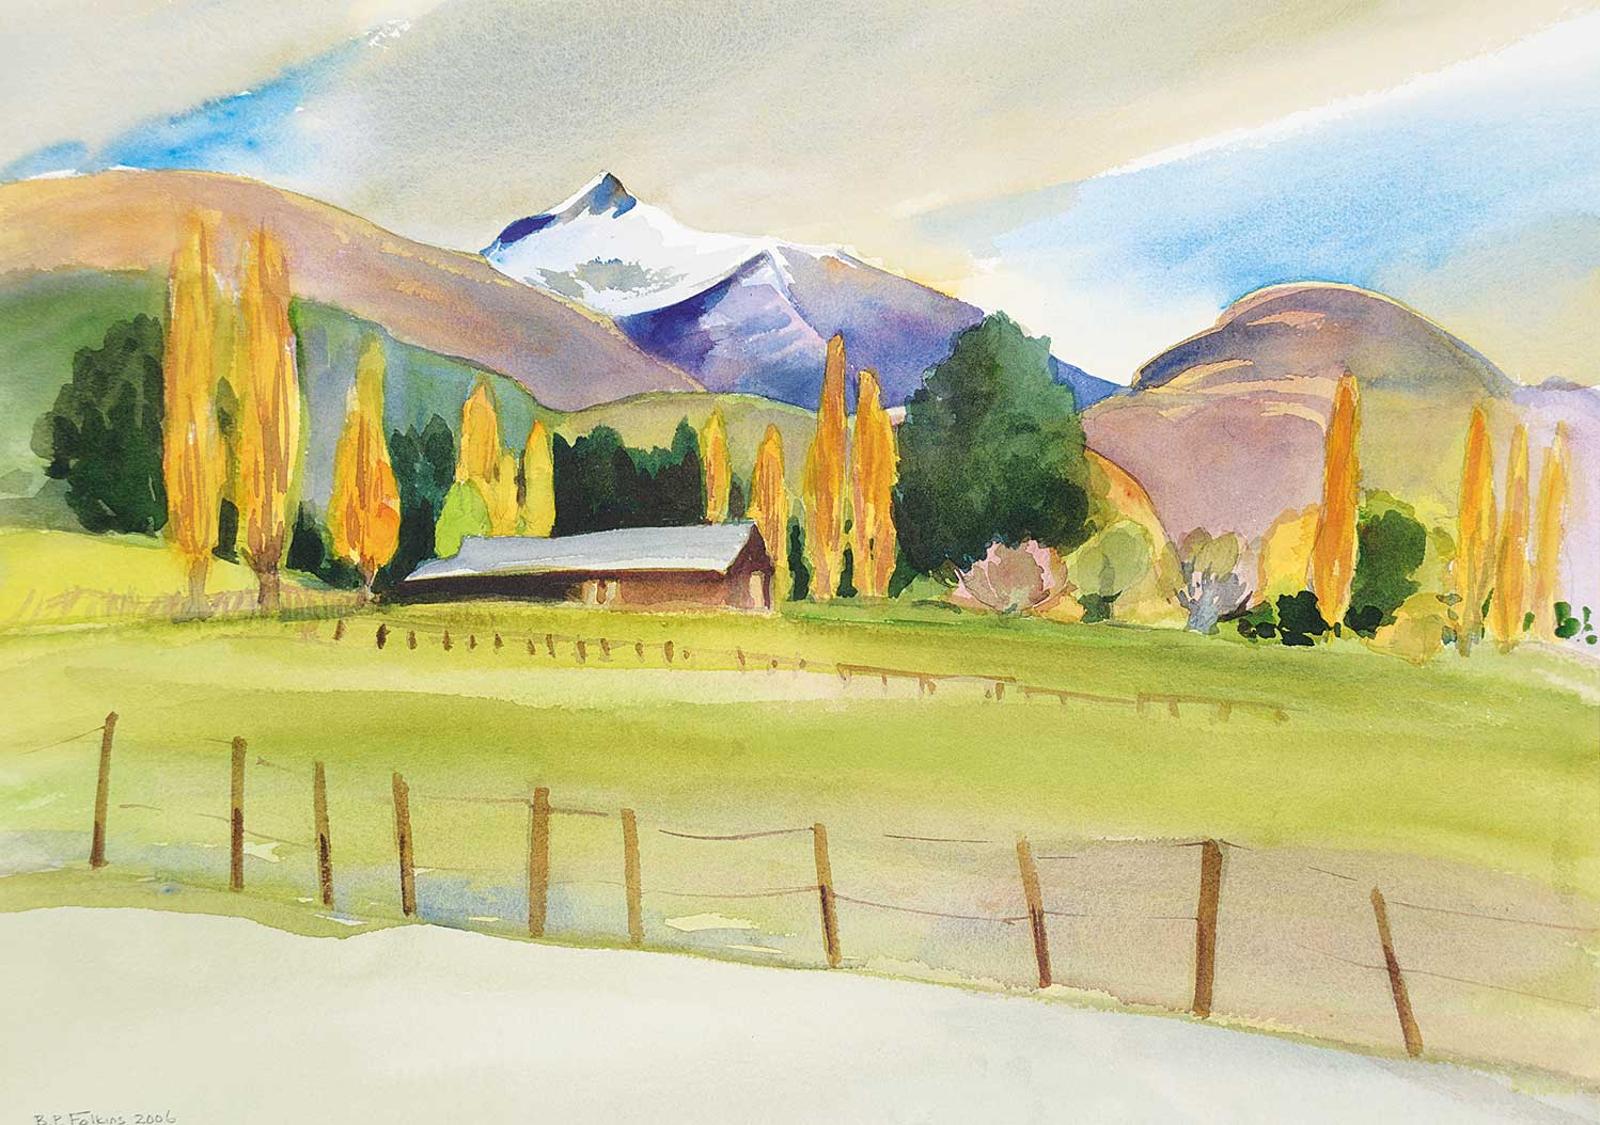 Bonnie Patricia Folkins - View of Mount Aspiring from the Wanaka